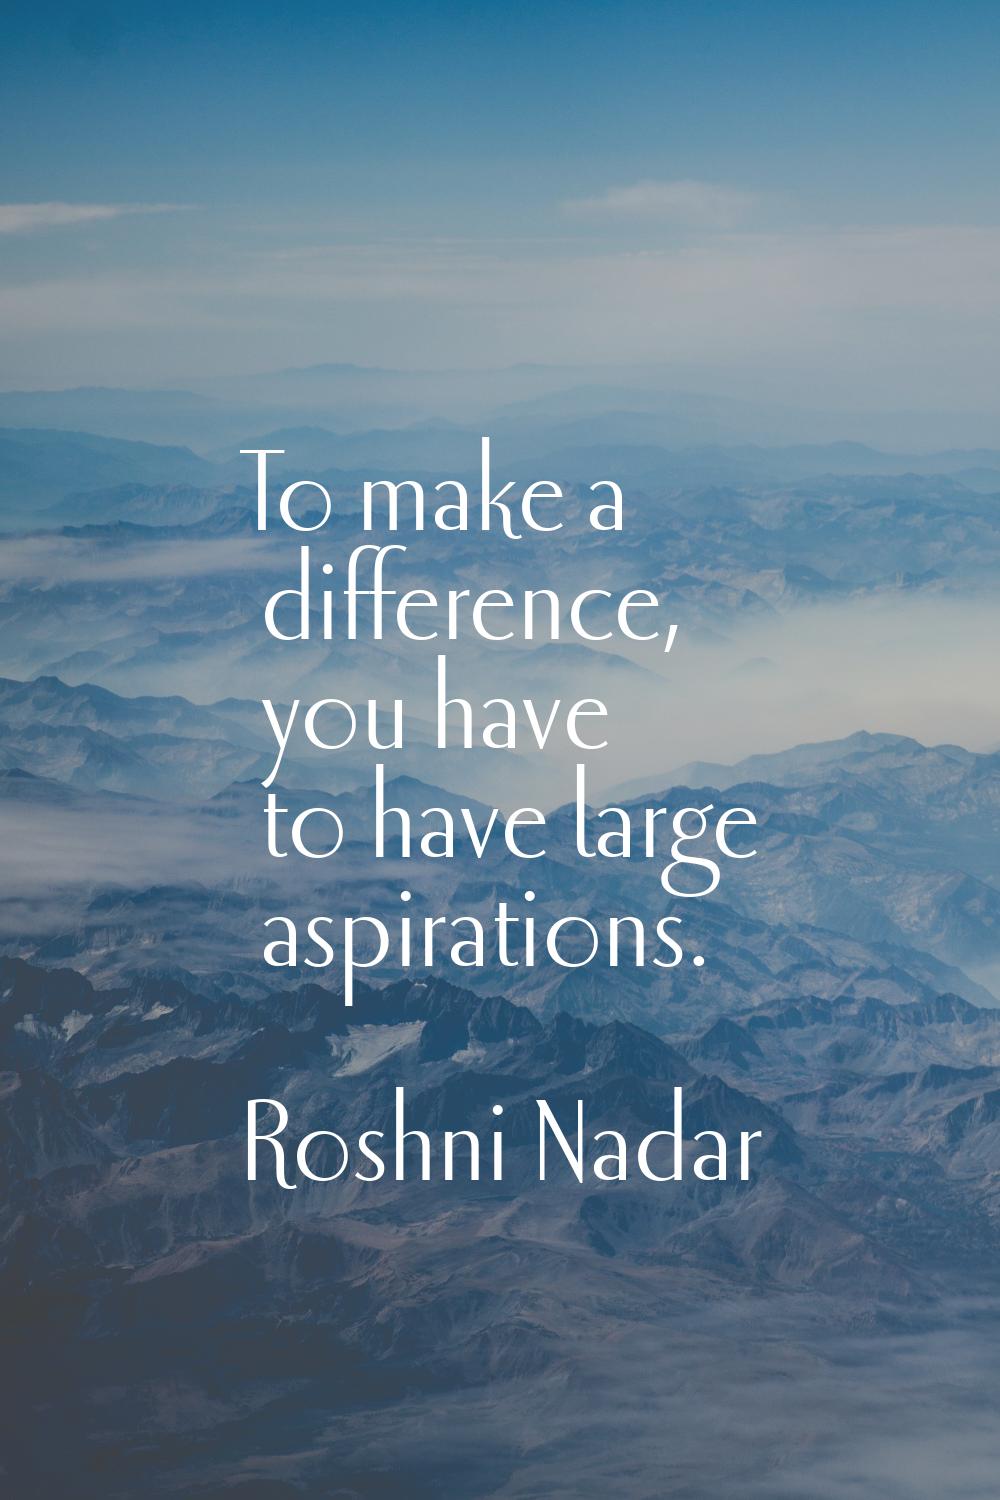 To make a difference, you have to have large aspirations.